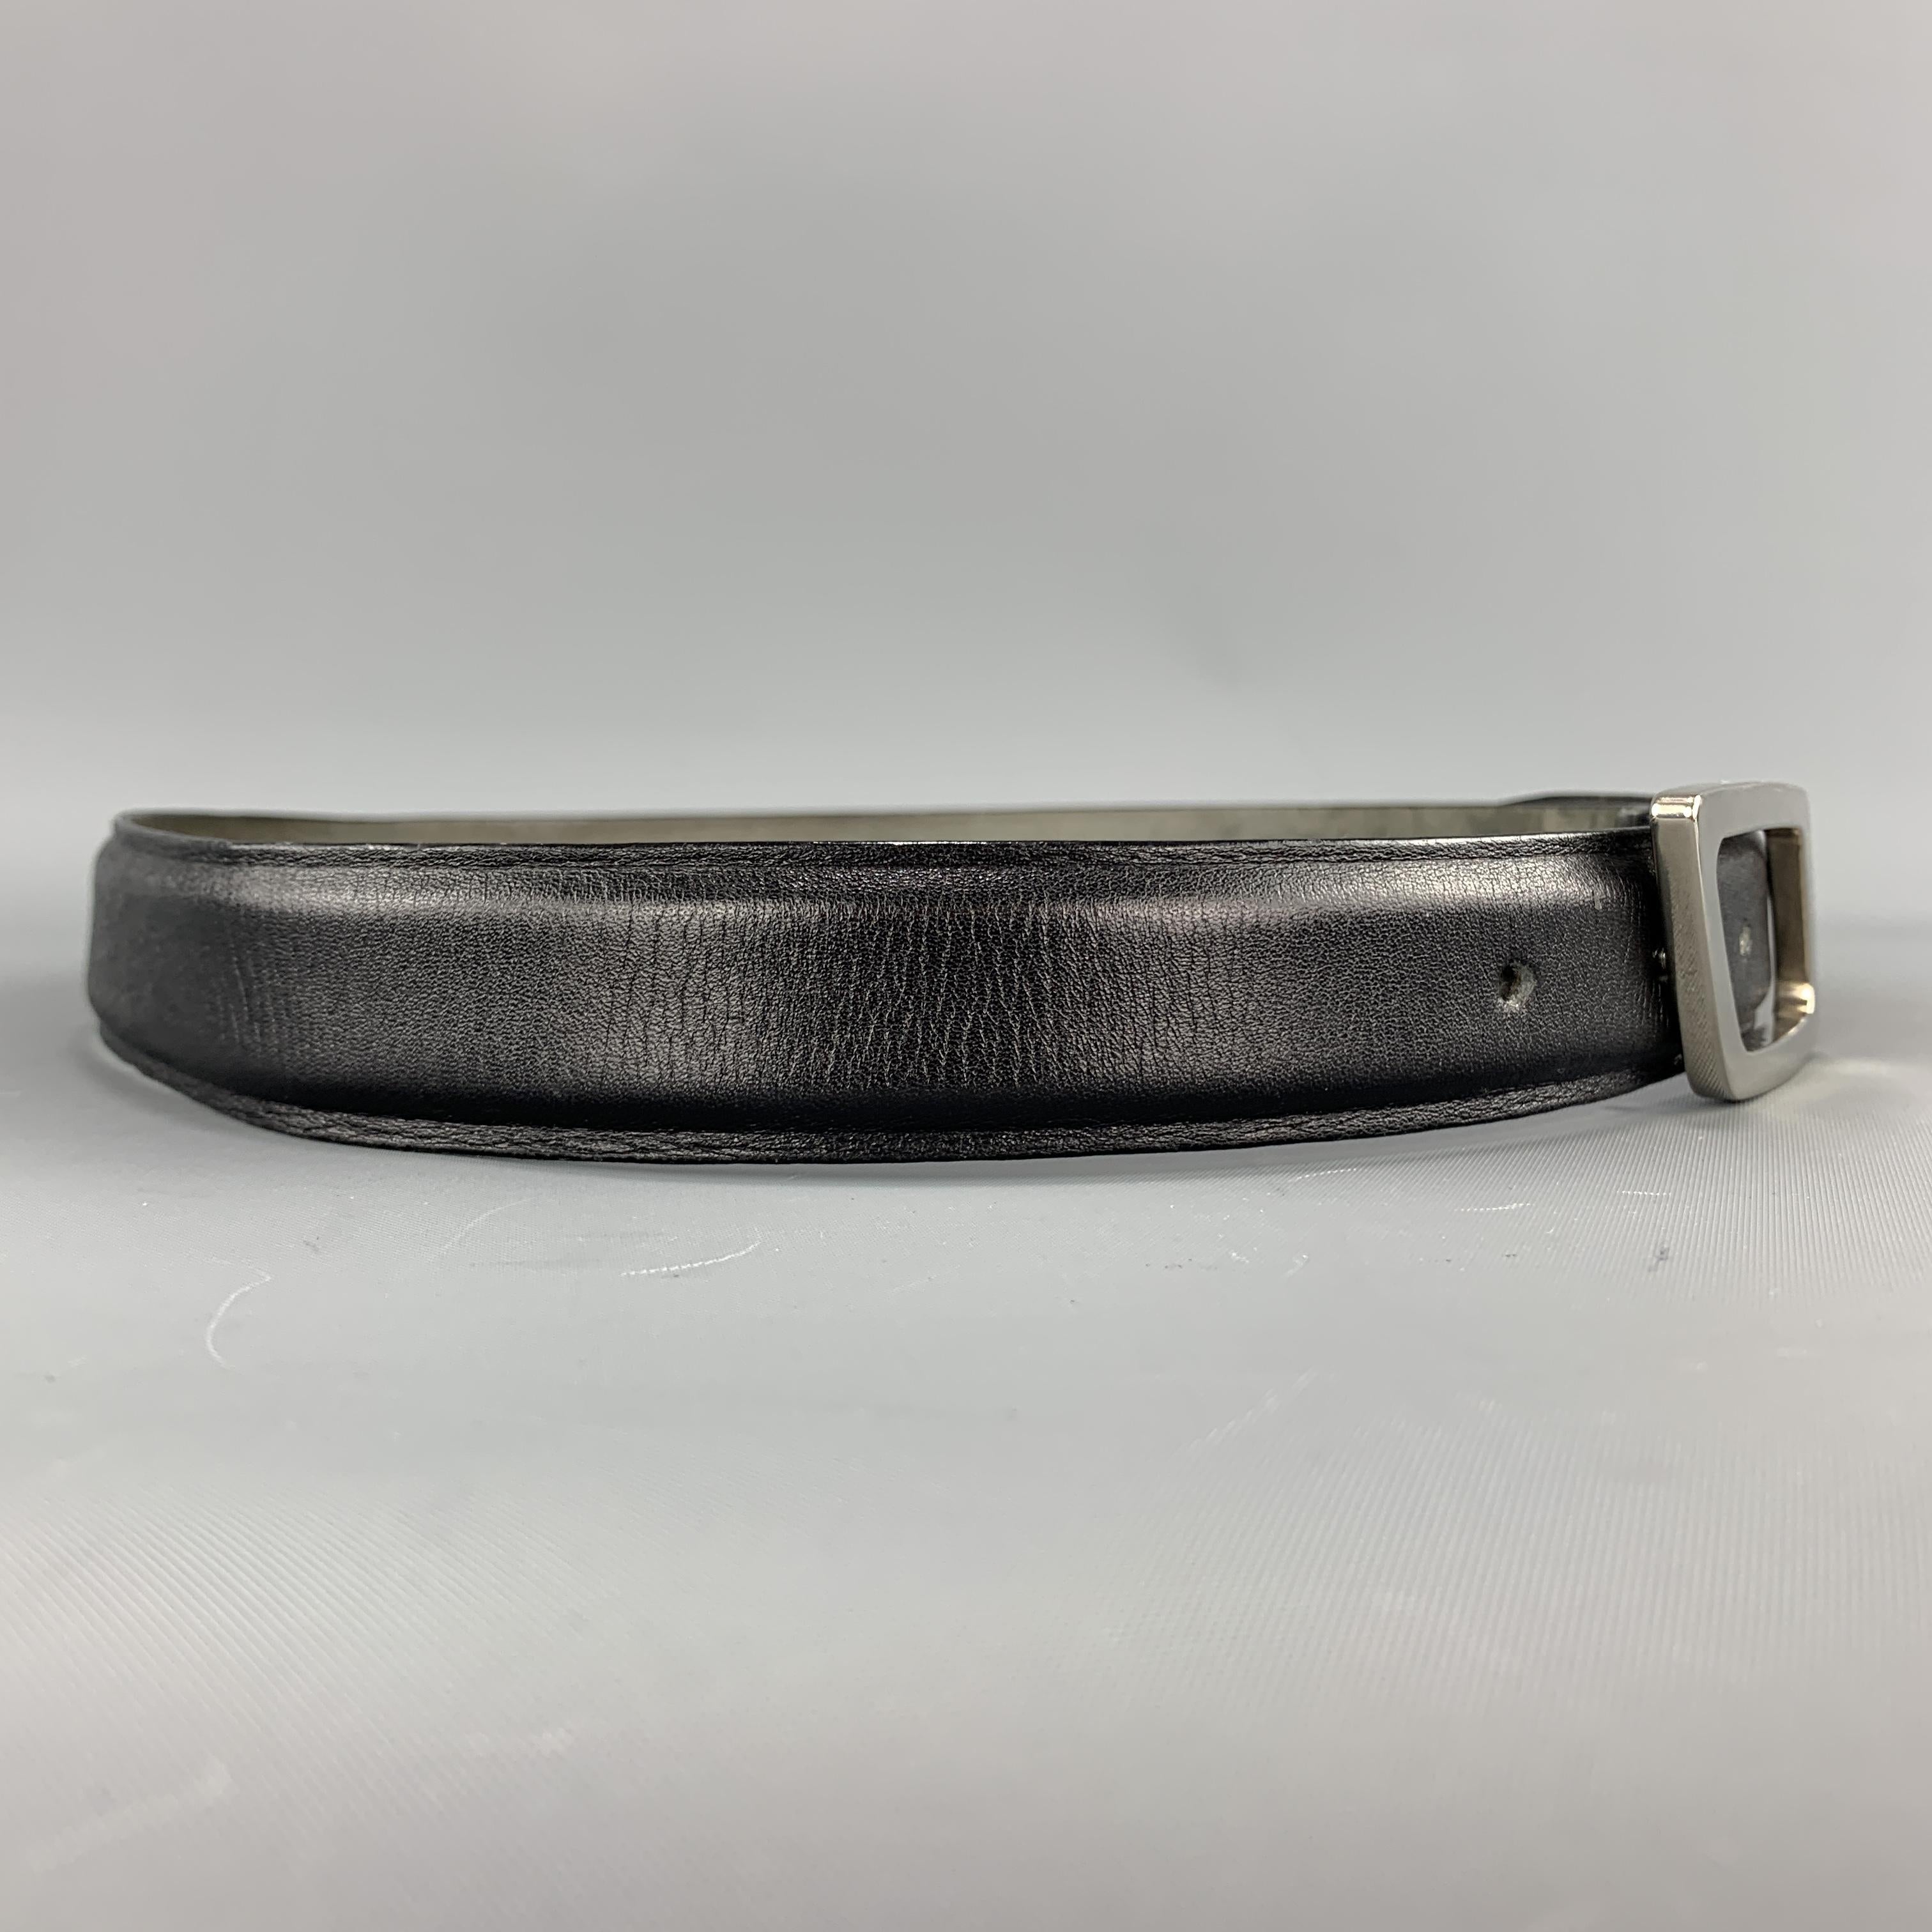 Vintage 1990s THIERRY MUGLER dress belt features an embossed black leather strap with a silver tone cutout geometric shape buckle.

Very Good Pre-Owned Condition.
Marked: 90/36

Length:37 in.
Width: 1 in.
Fits: 28.5 - 33.5 in.
Buckle: 8.5 x 4 cm.